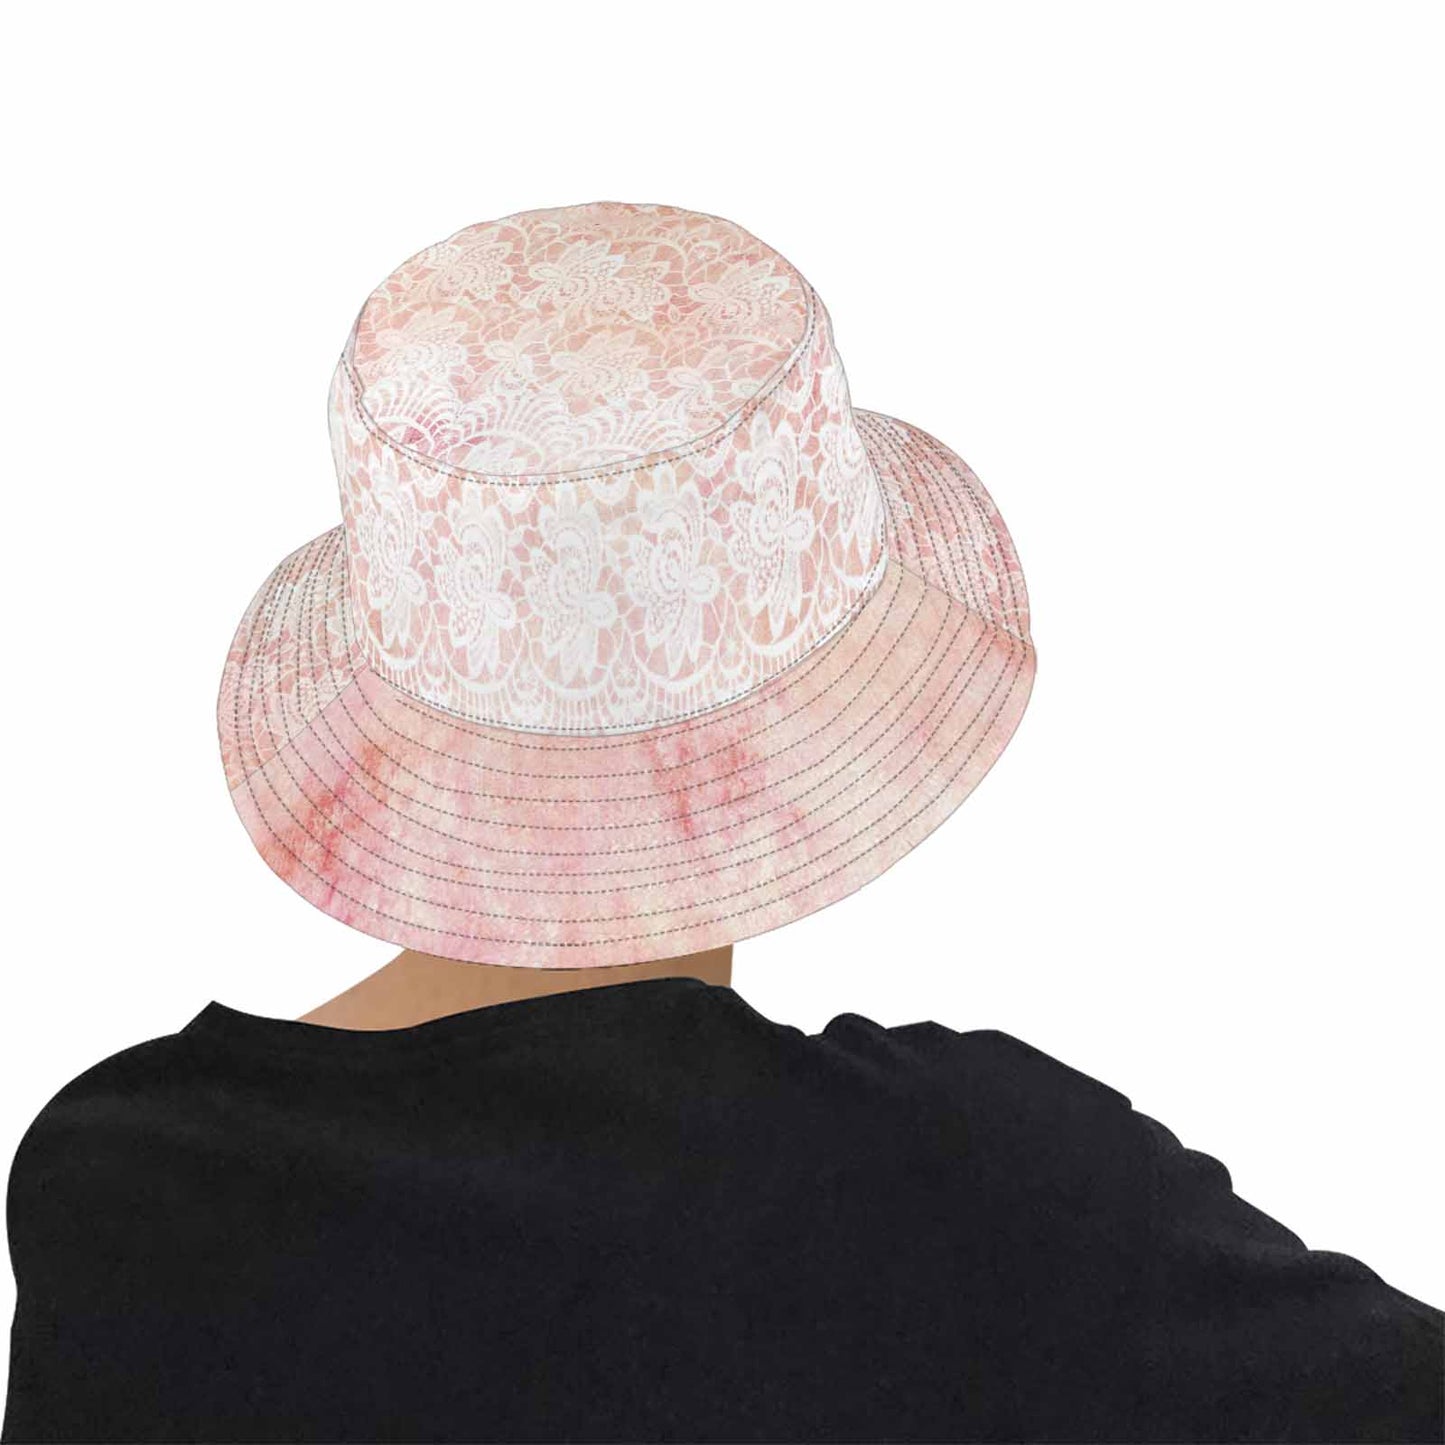 Victorian lace Bucket Hat, outdoors hat, design 38